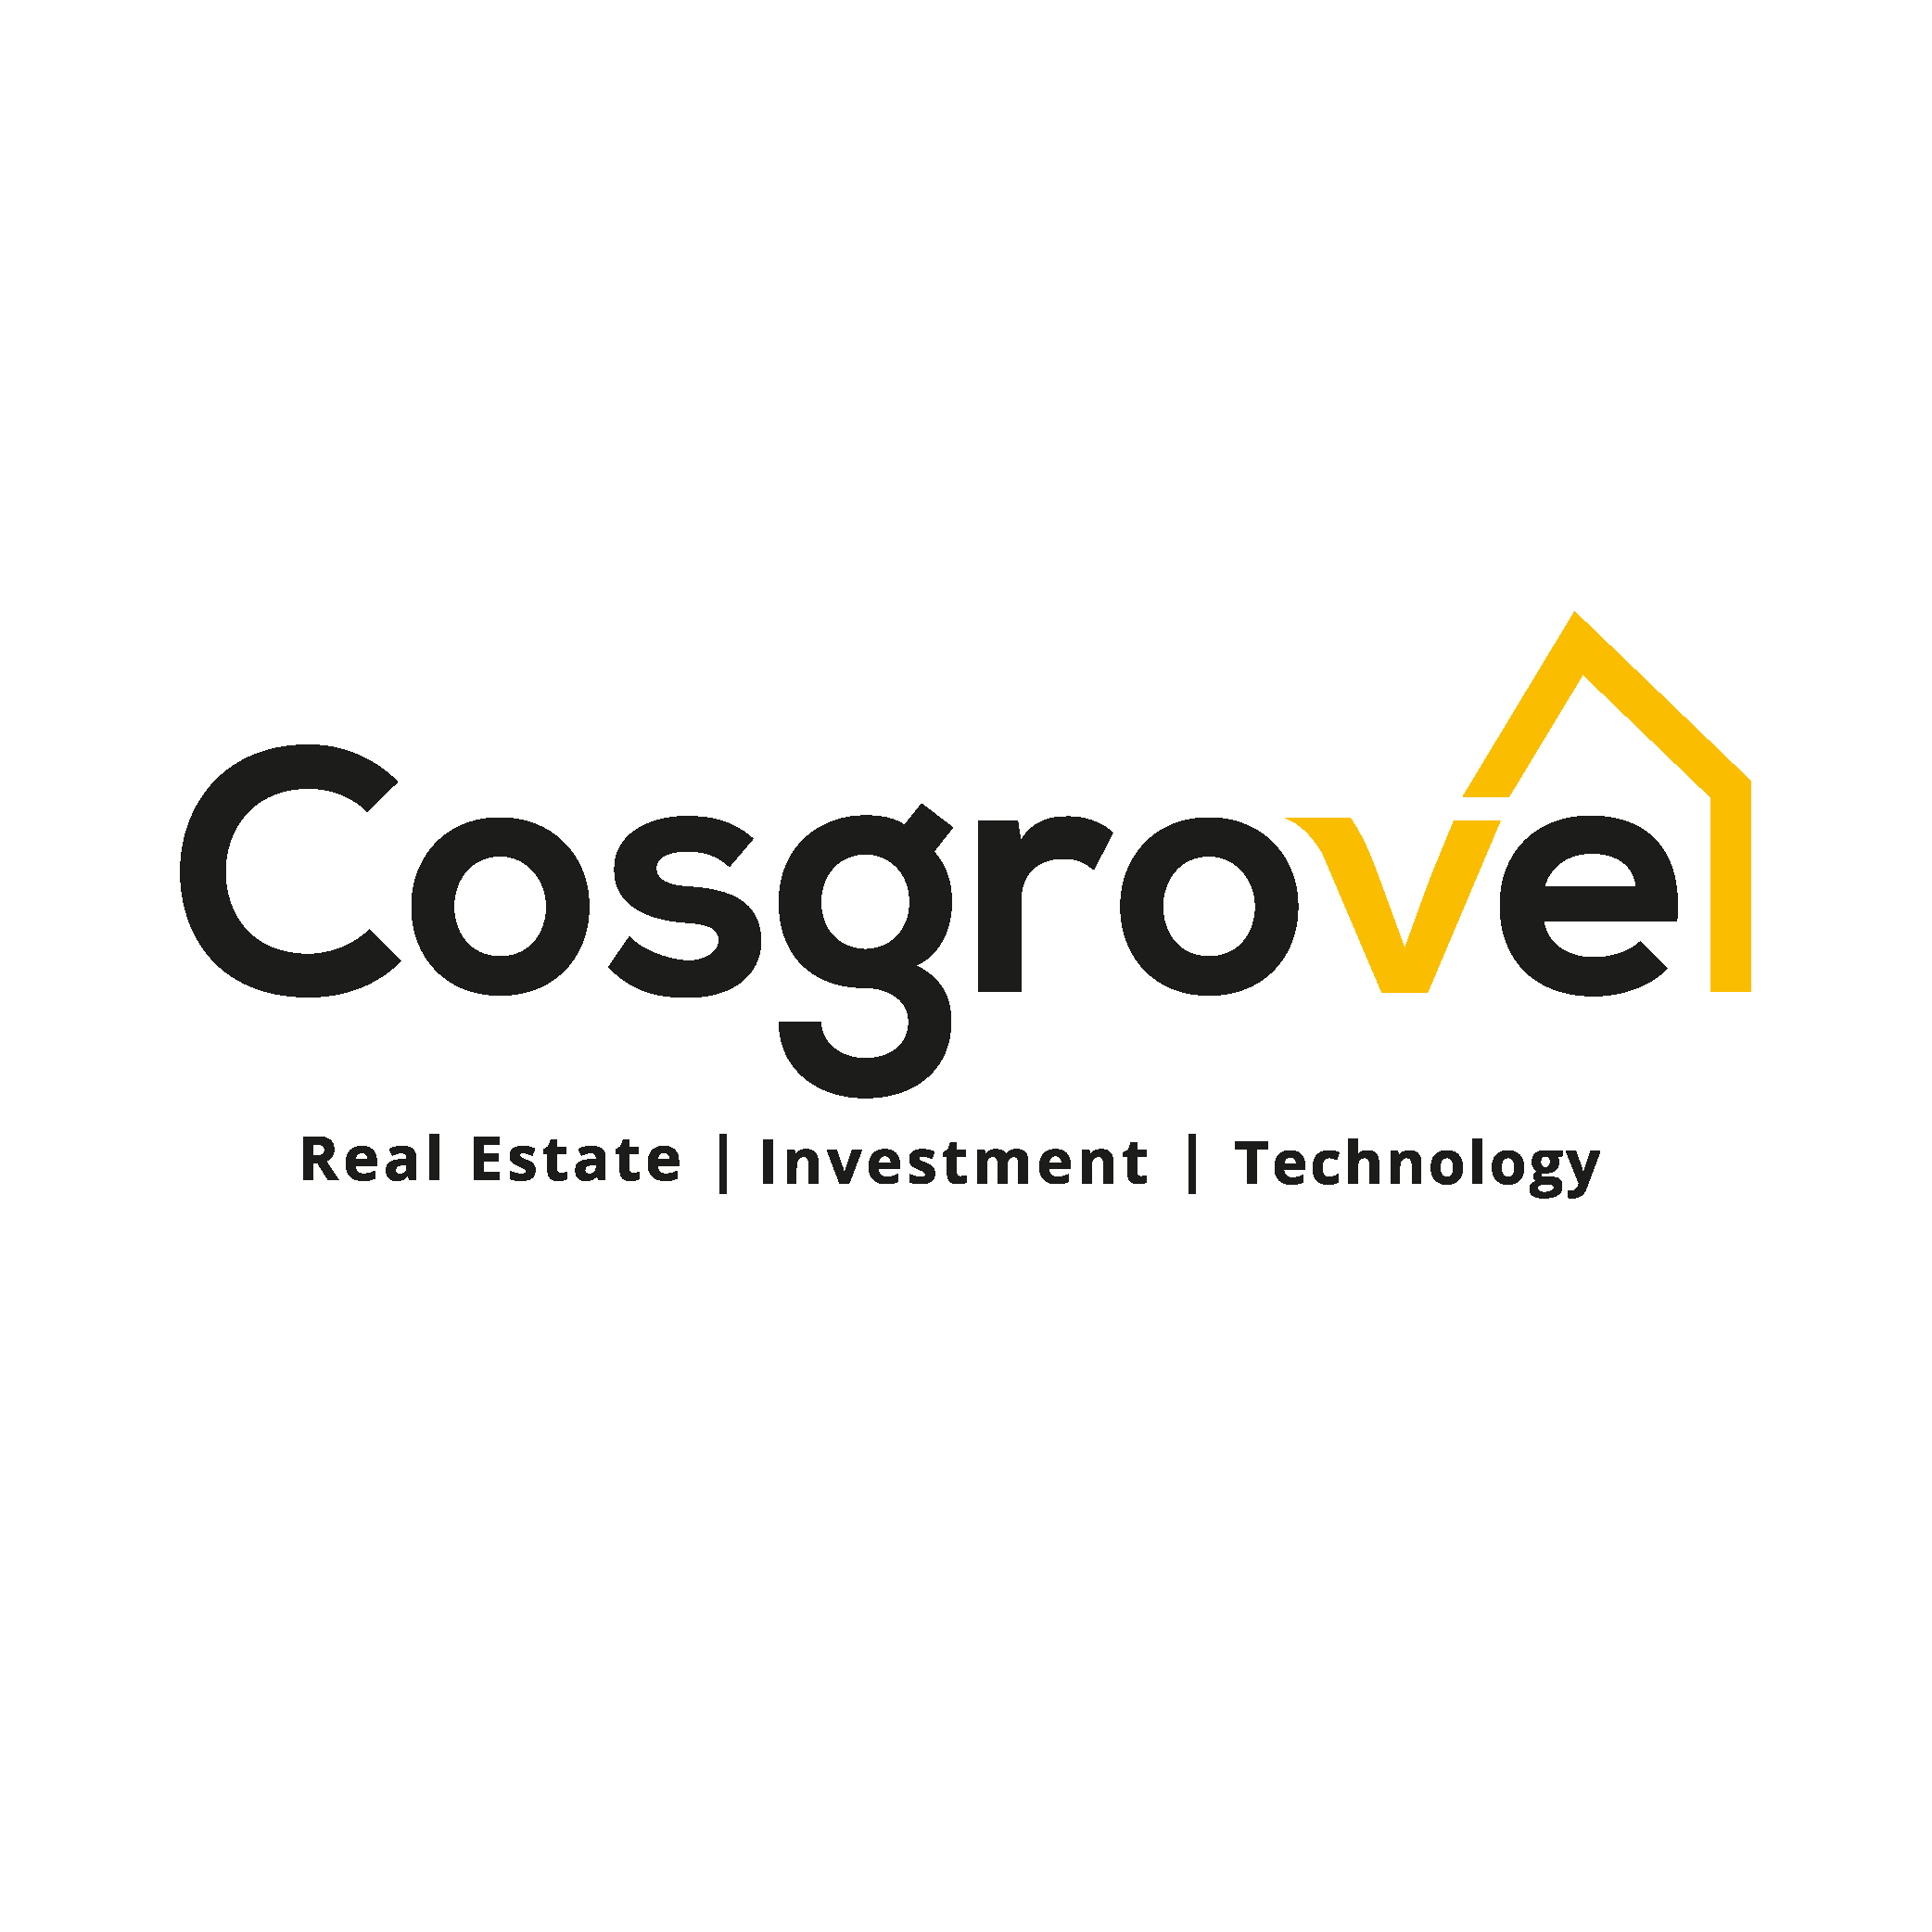 COSGROVE Smart Estate Wuye for commissioning on 6th December